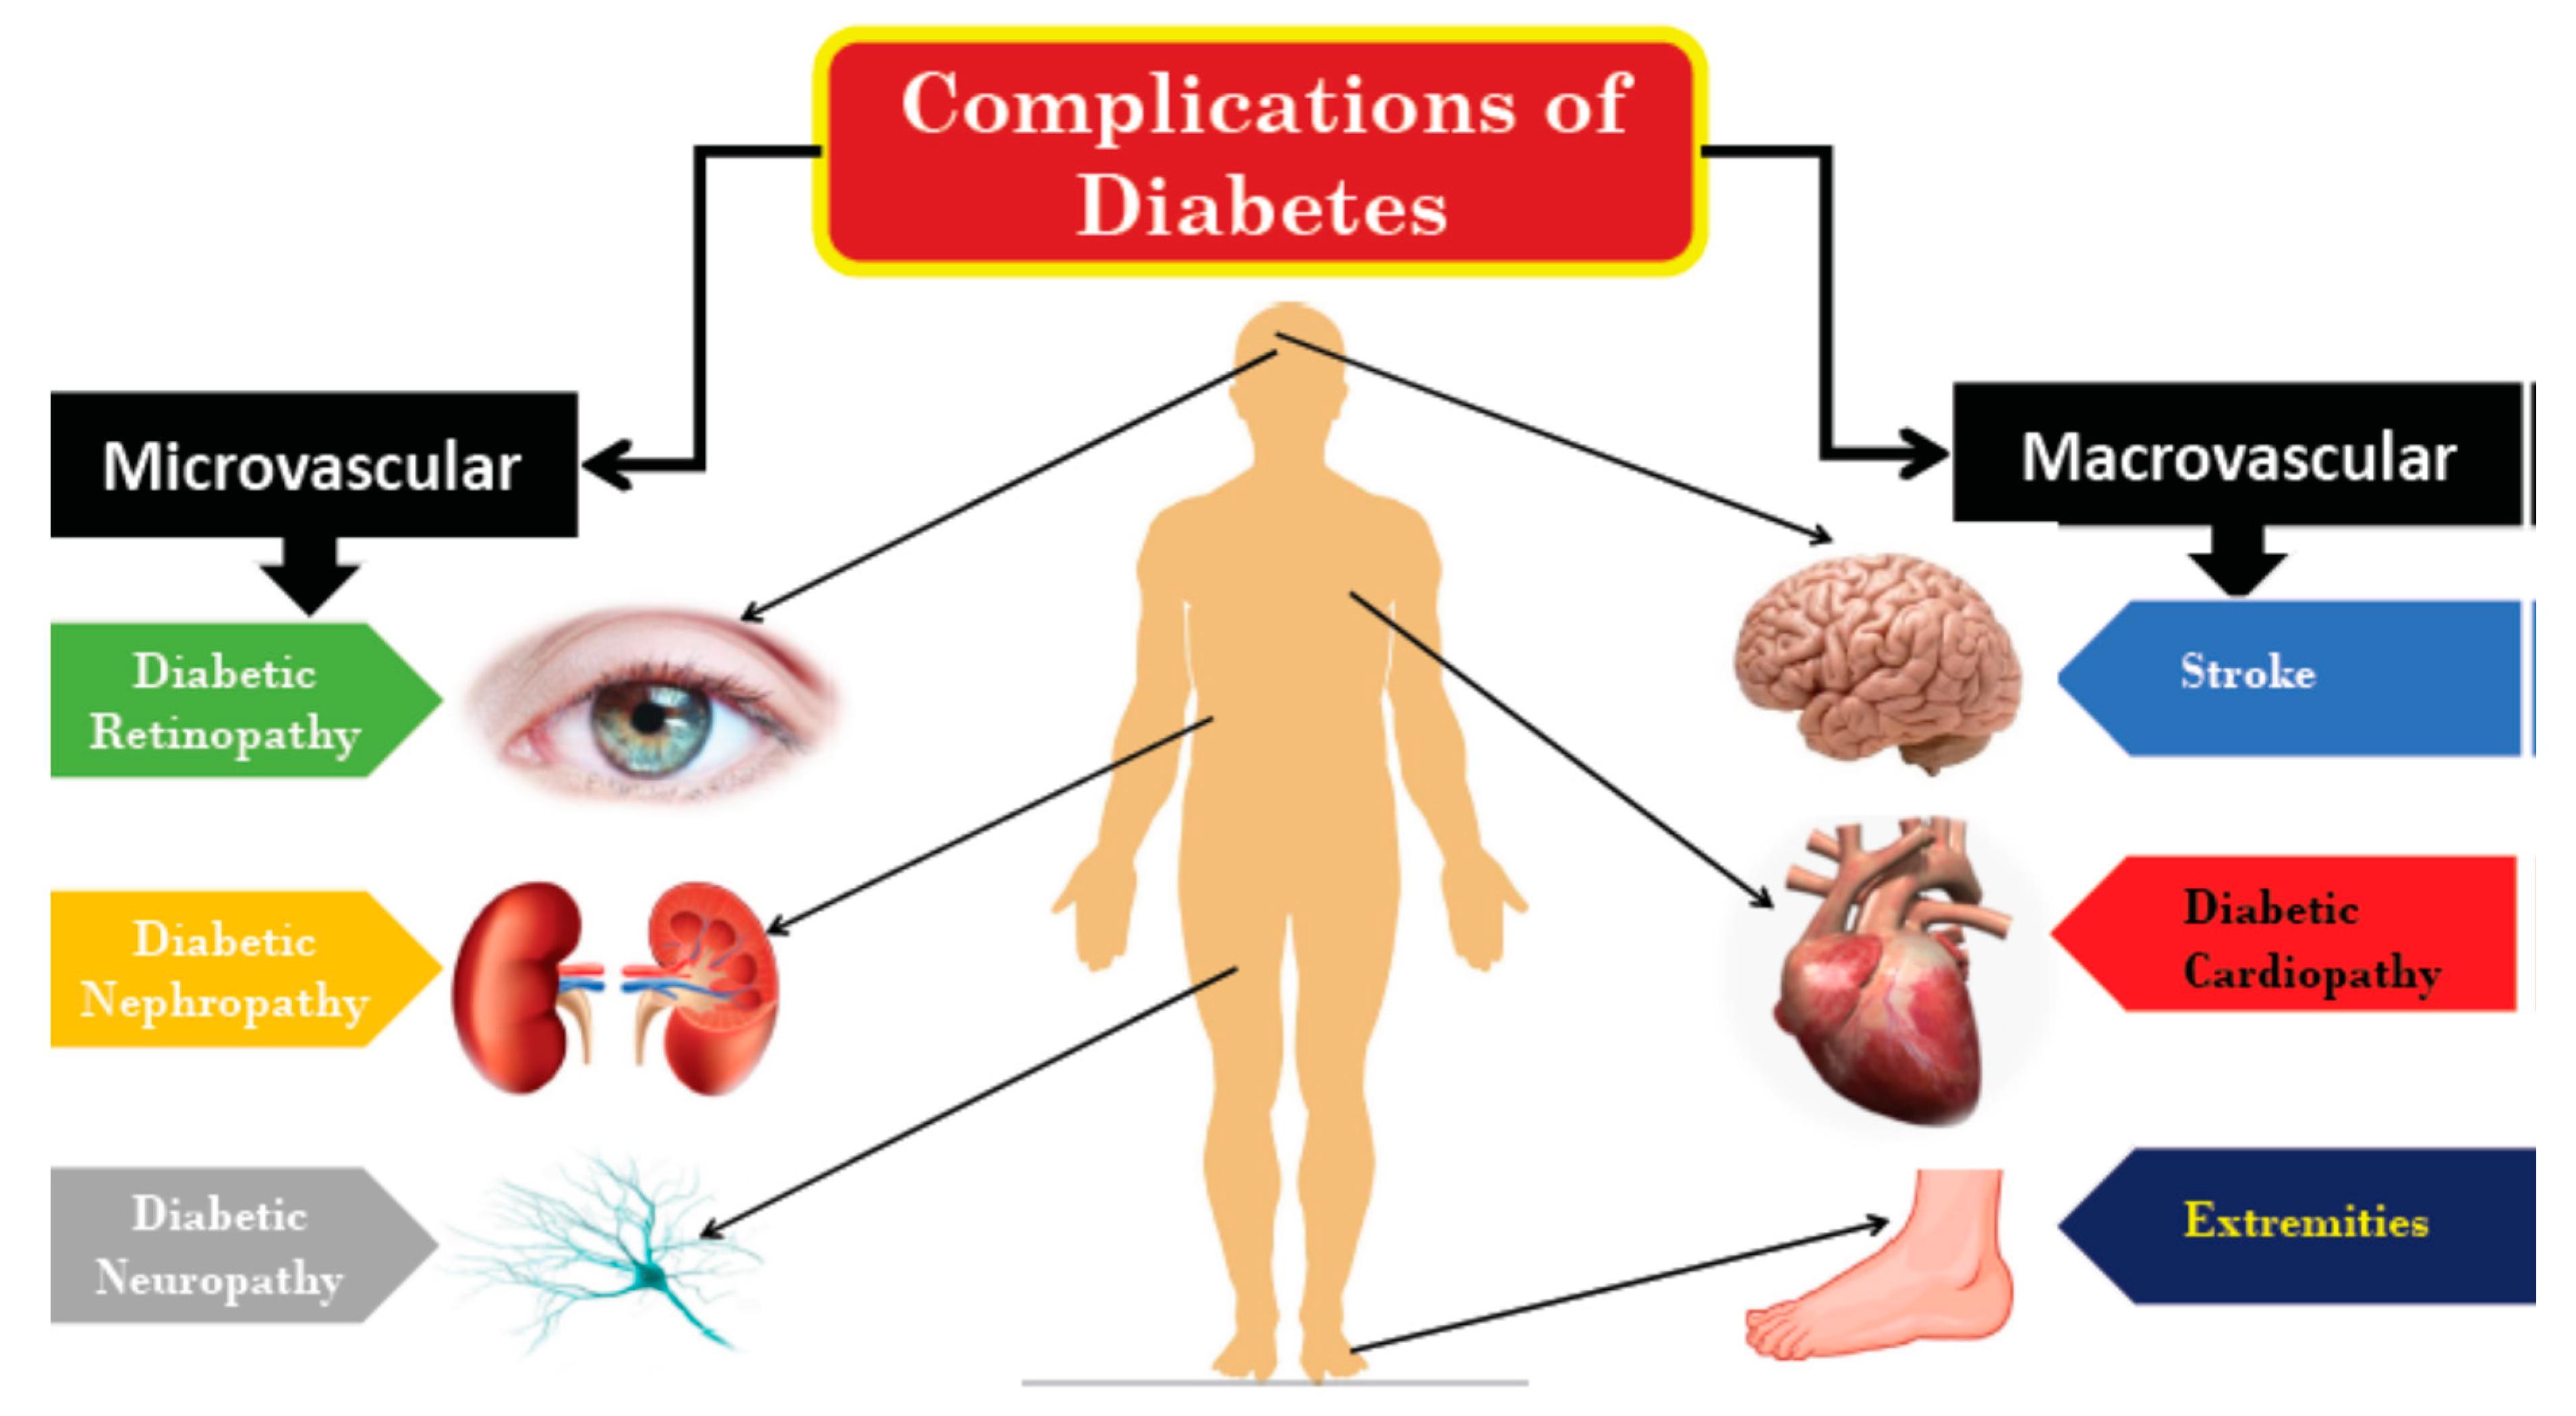 Modeling long-term diabetes and related complications in rats